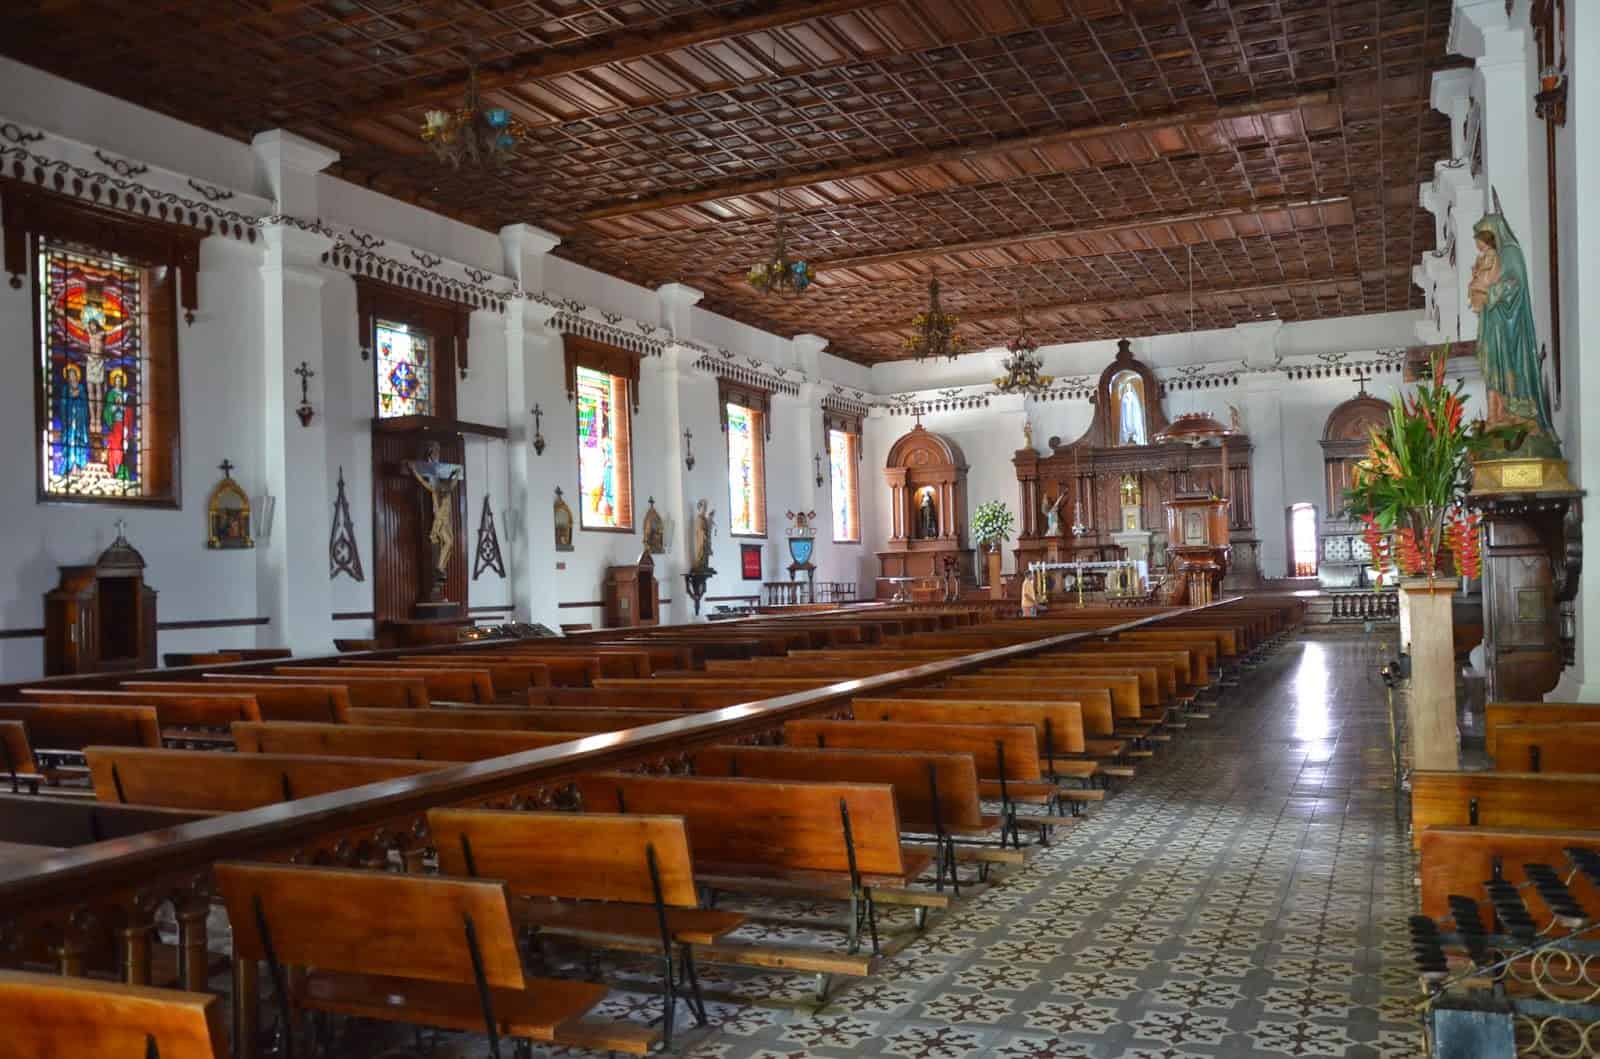 Nave of the Minor Basilica of the Immaculate Conception in Salamina, Caldas, Colombia